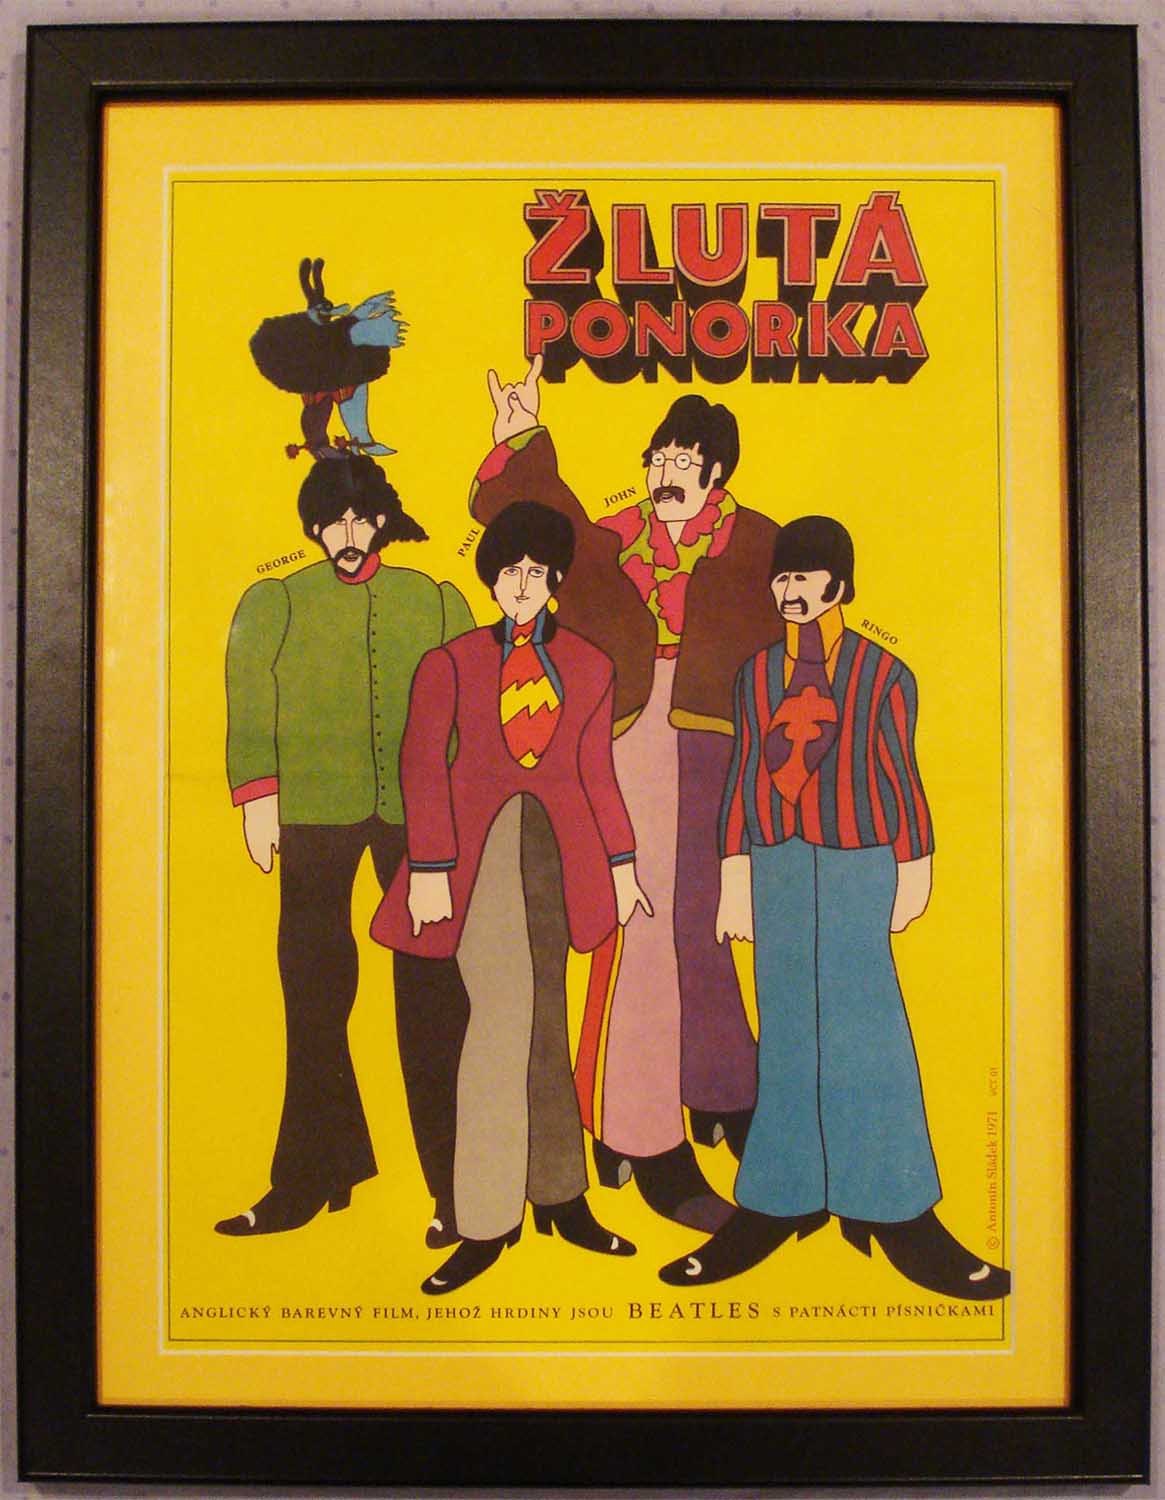 The Beatles Yellow Submarine-Žlutá Ponorka (1968) Czech Language Poster from 1971 (Fine to Very Fine)